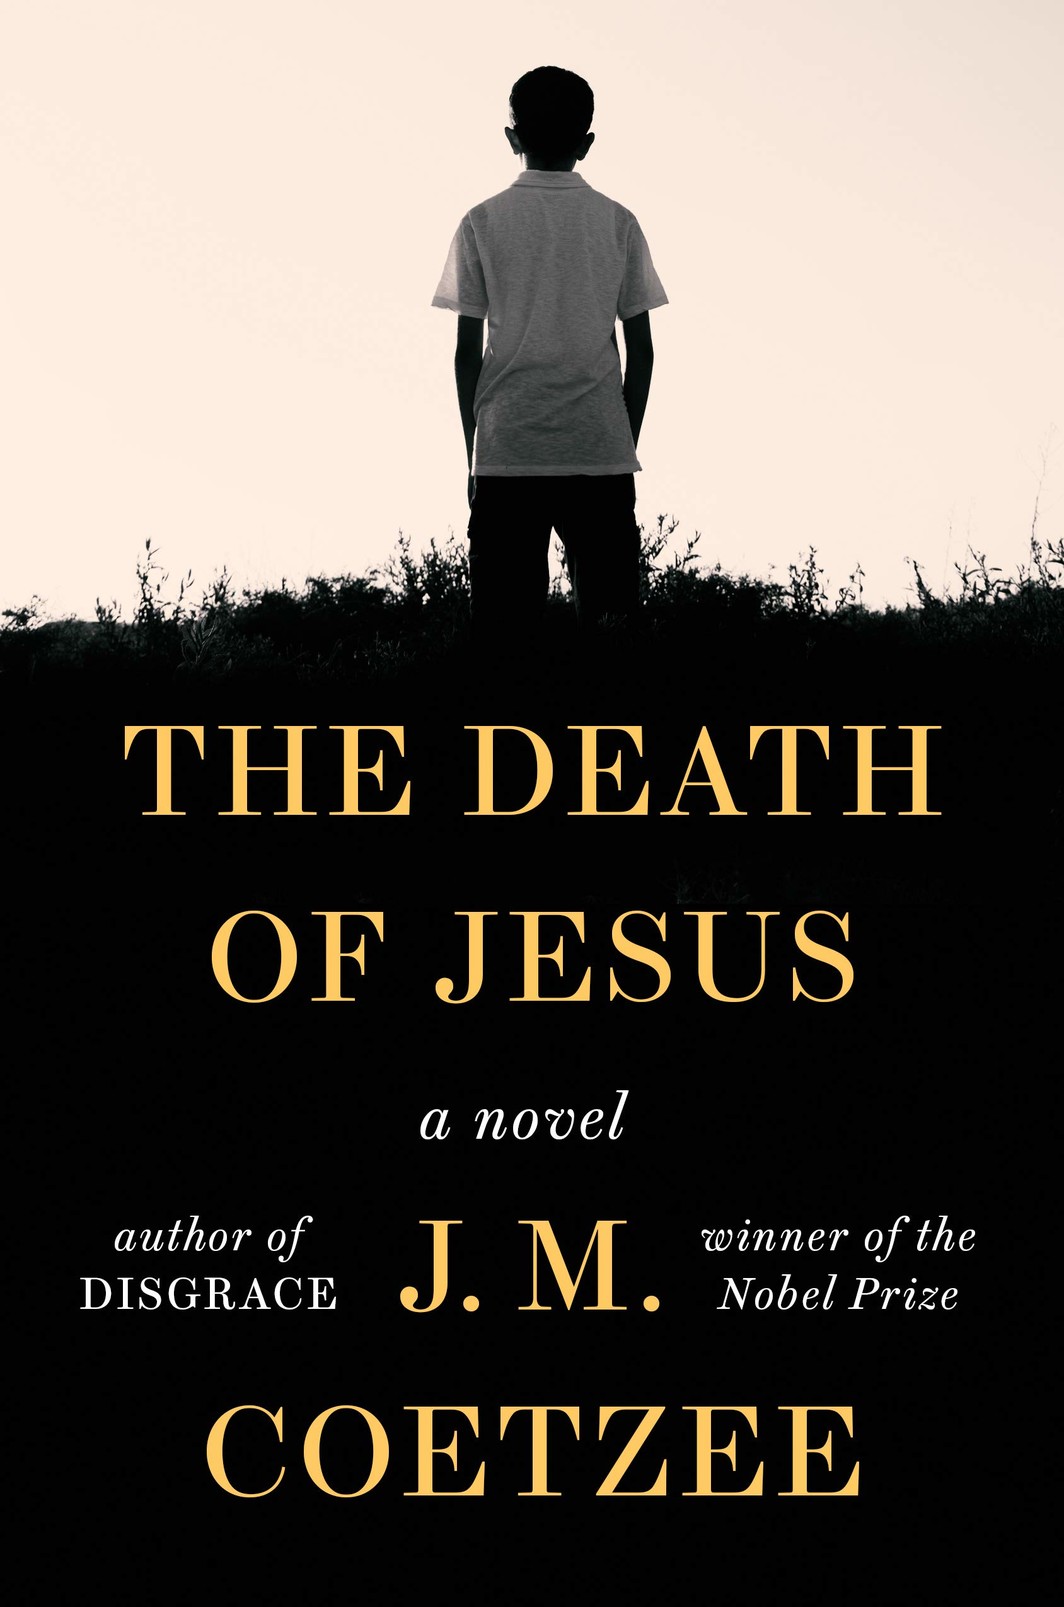 The cover of THE DEATH OF JESUS